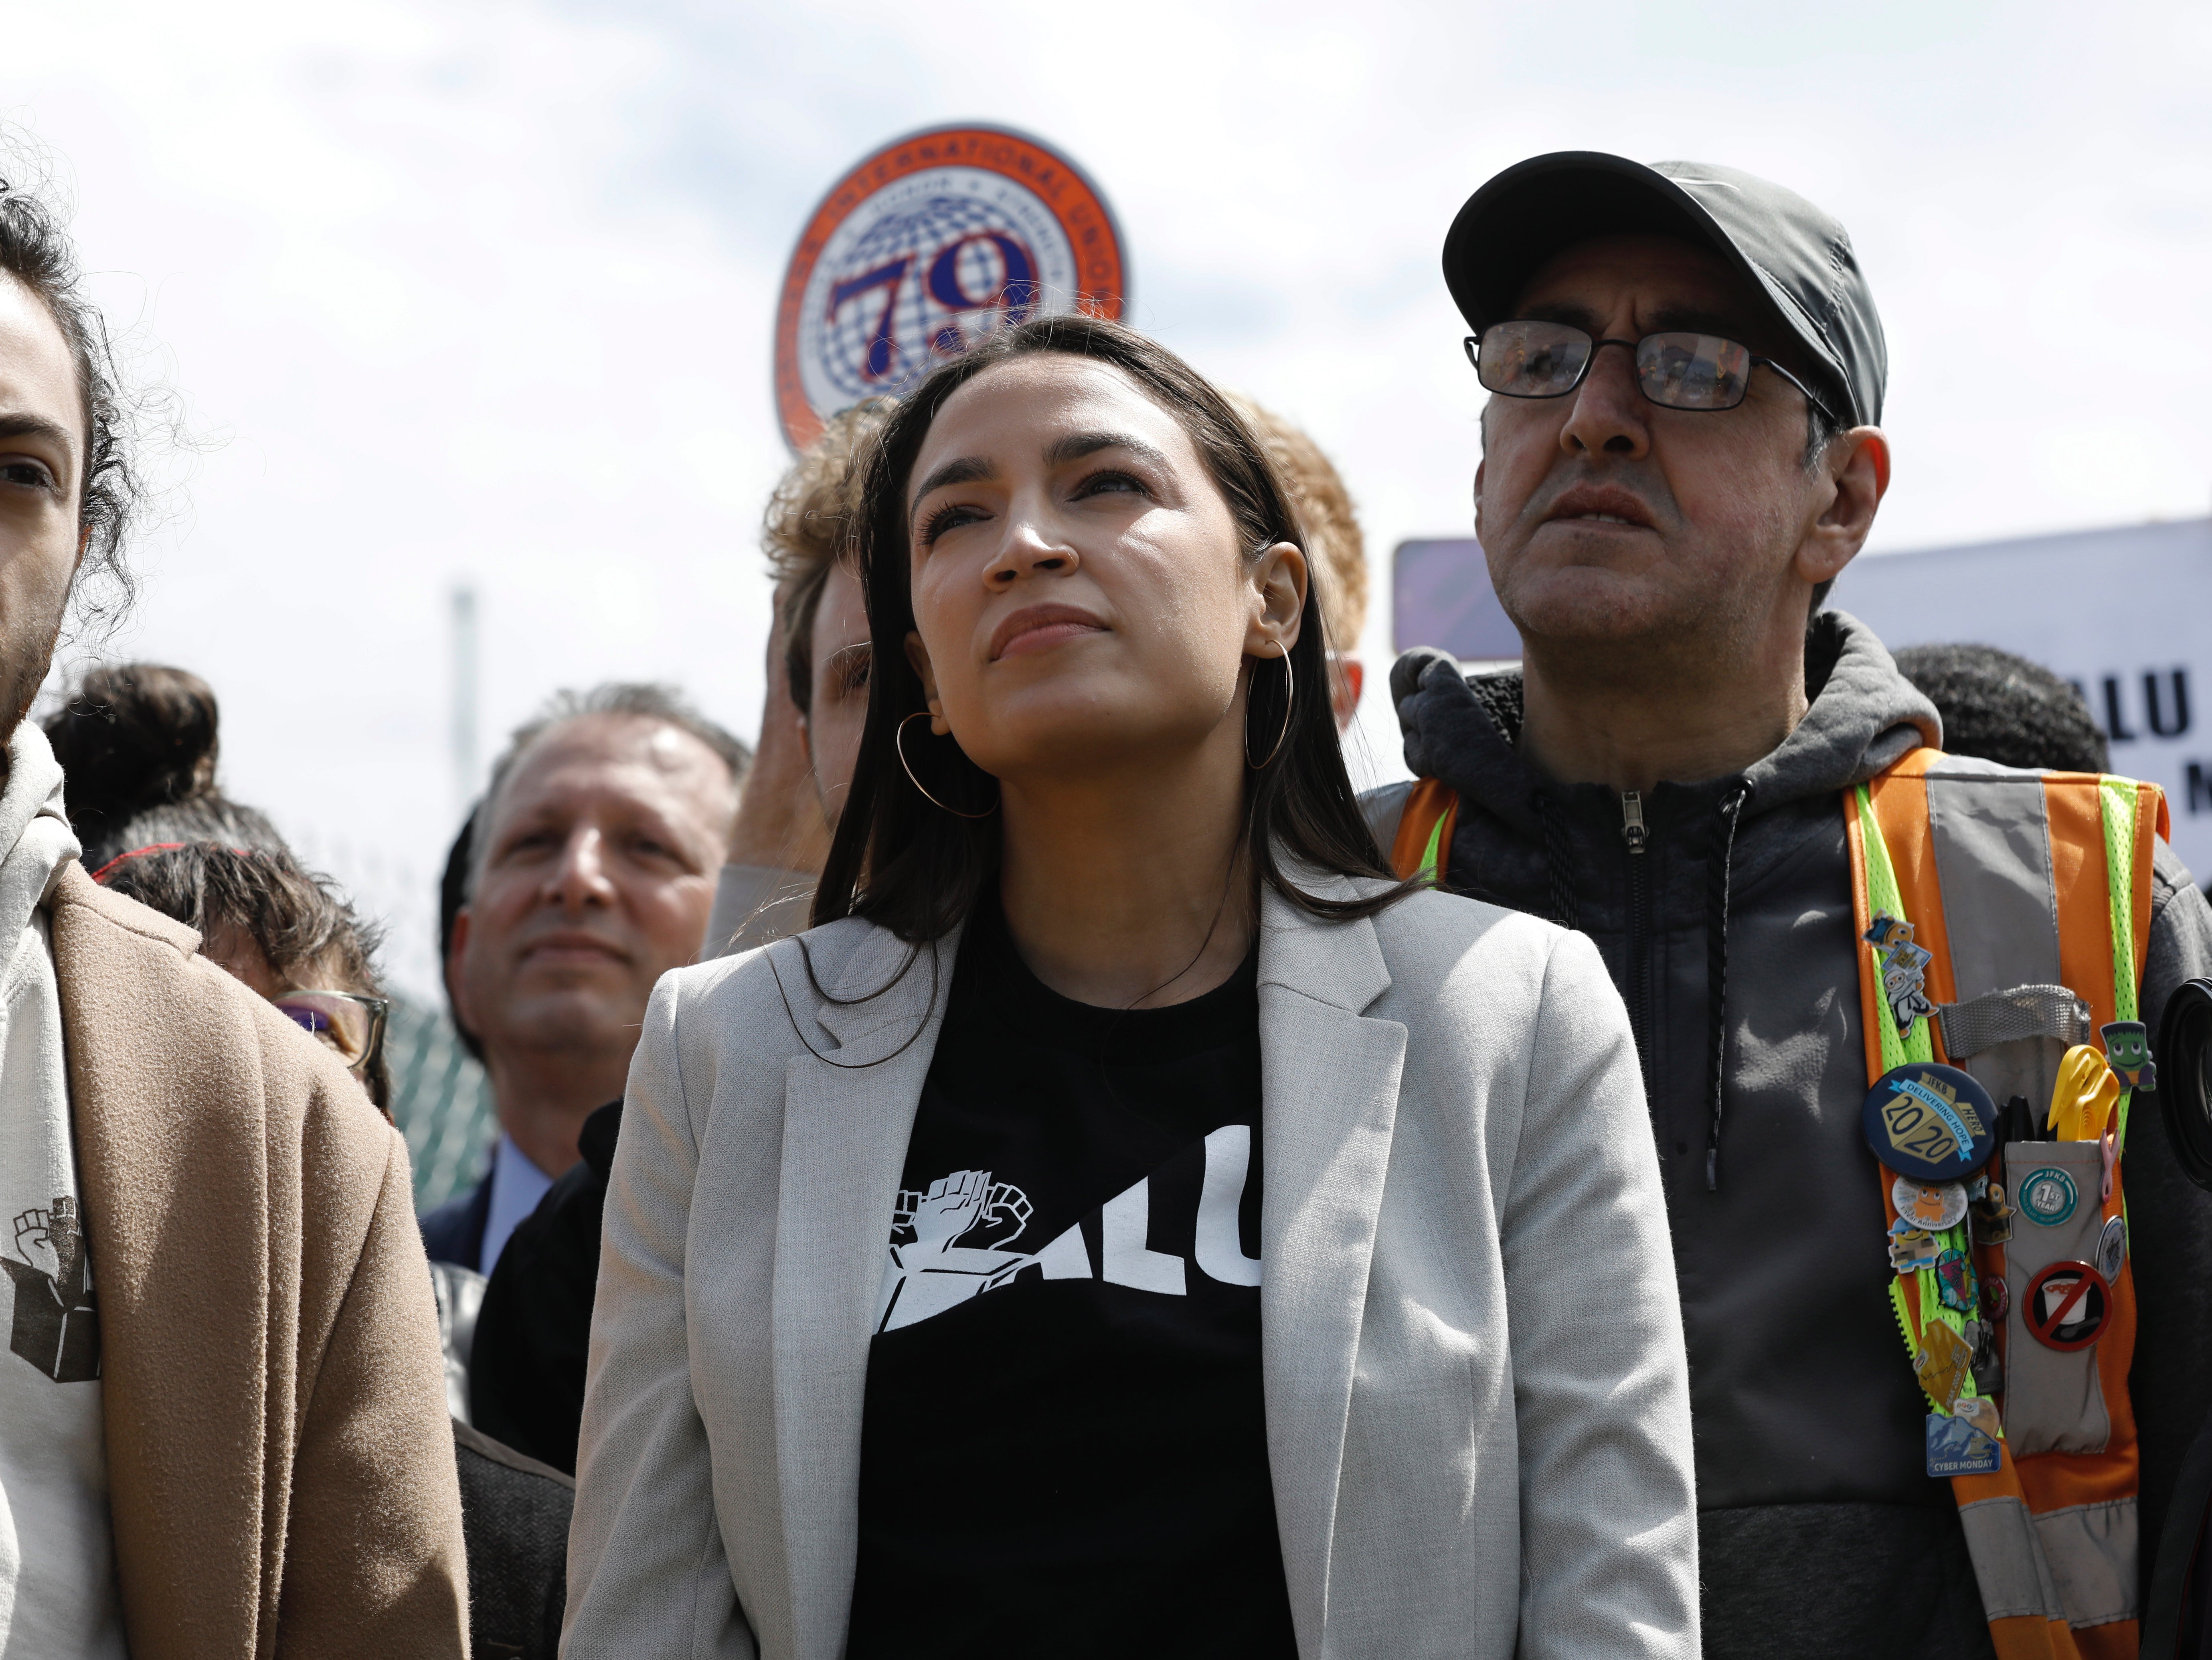 Ocasio-Cortez spoke at a Amazon Workers Union rally in April